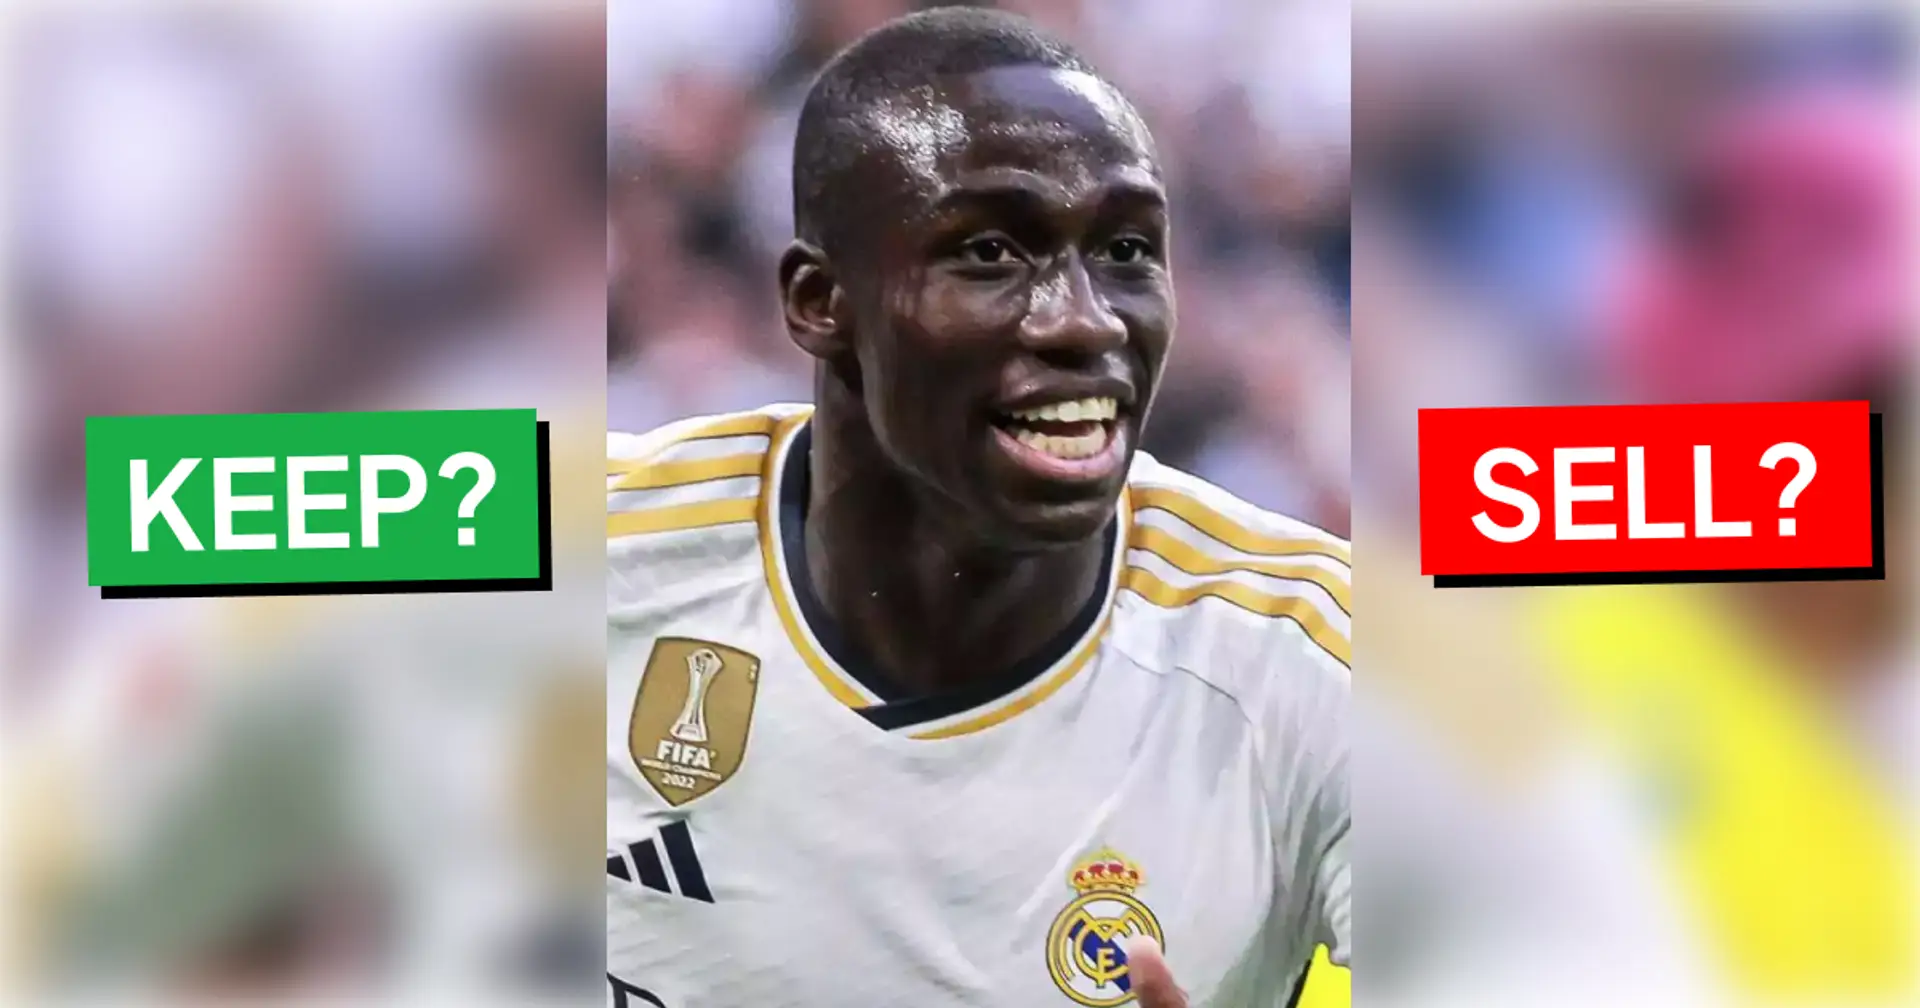 Mendy — keep or sell? Real Madrid fans split on Ferland future — have your say in the comments, too